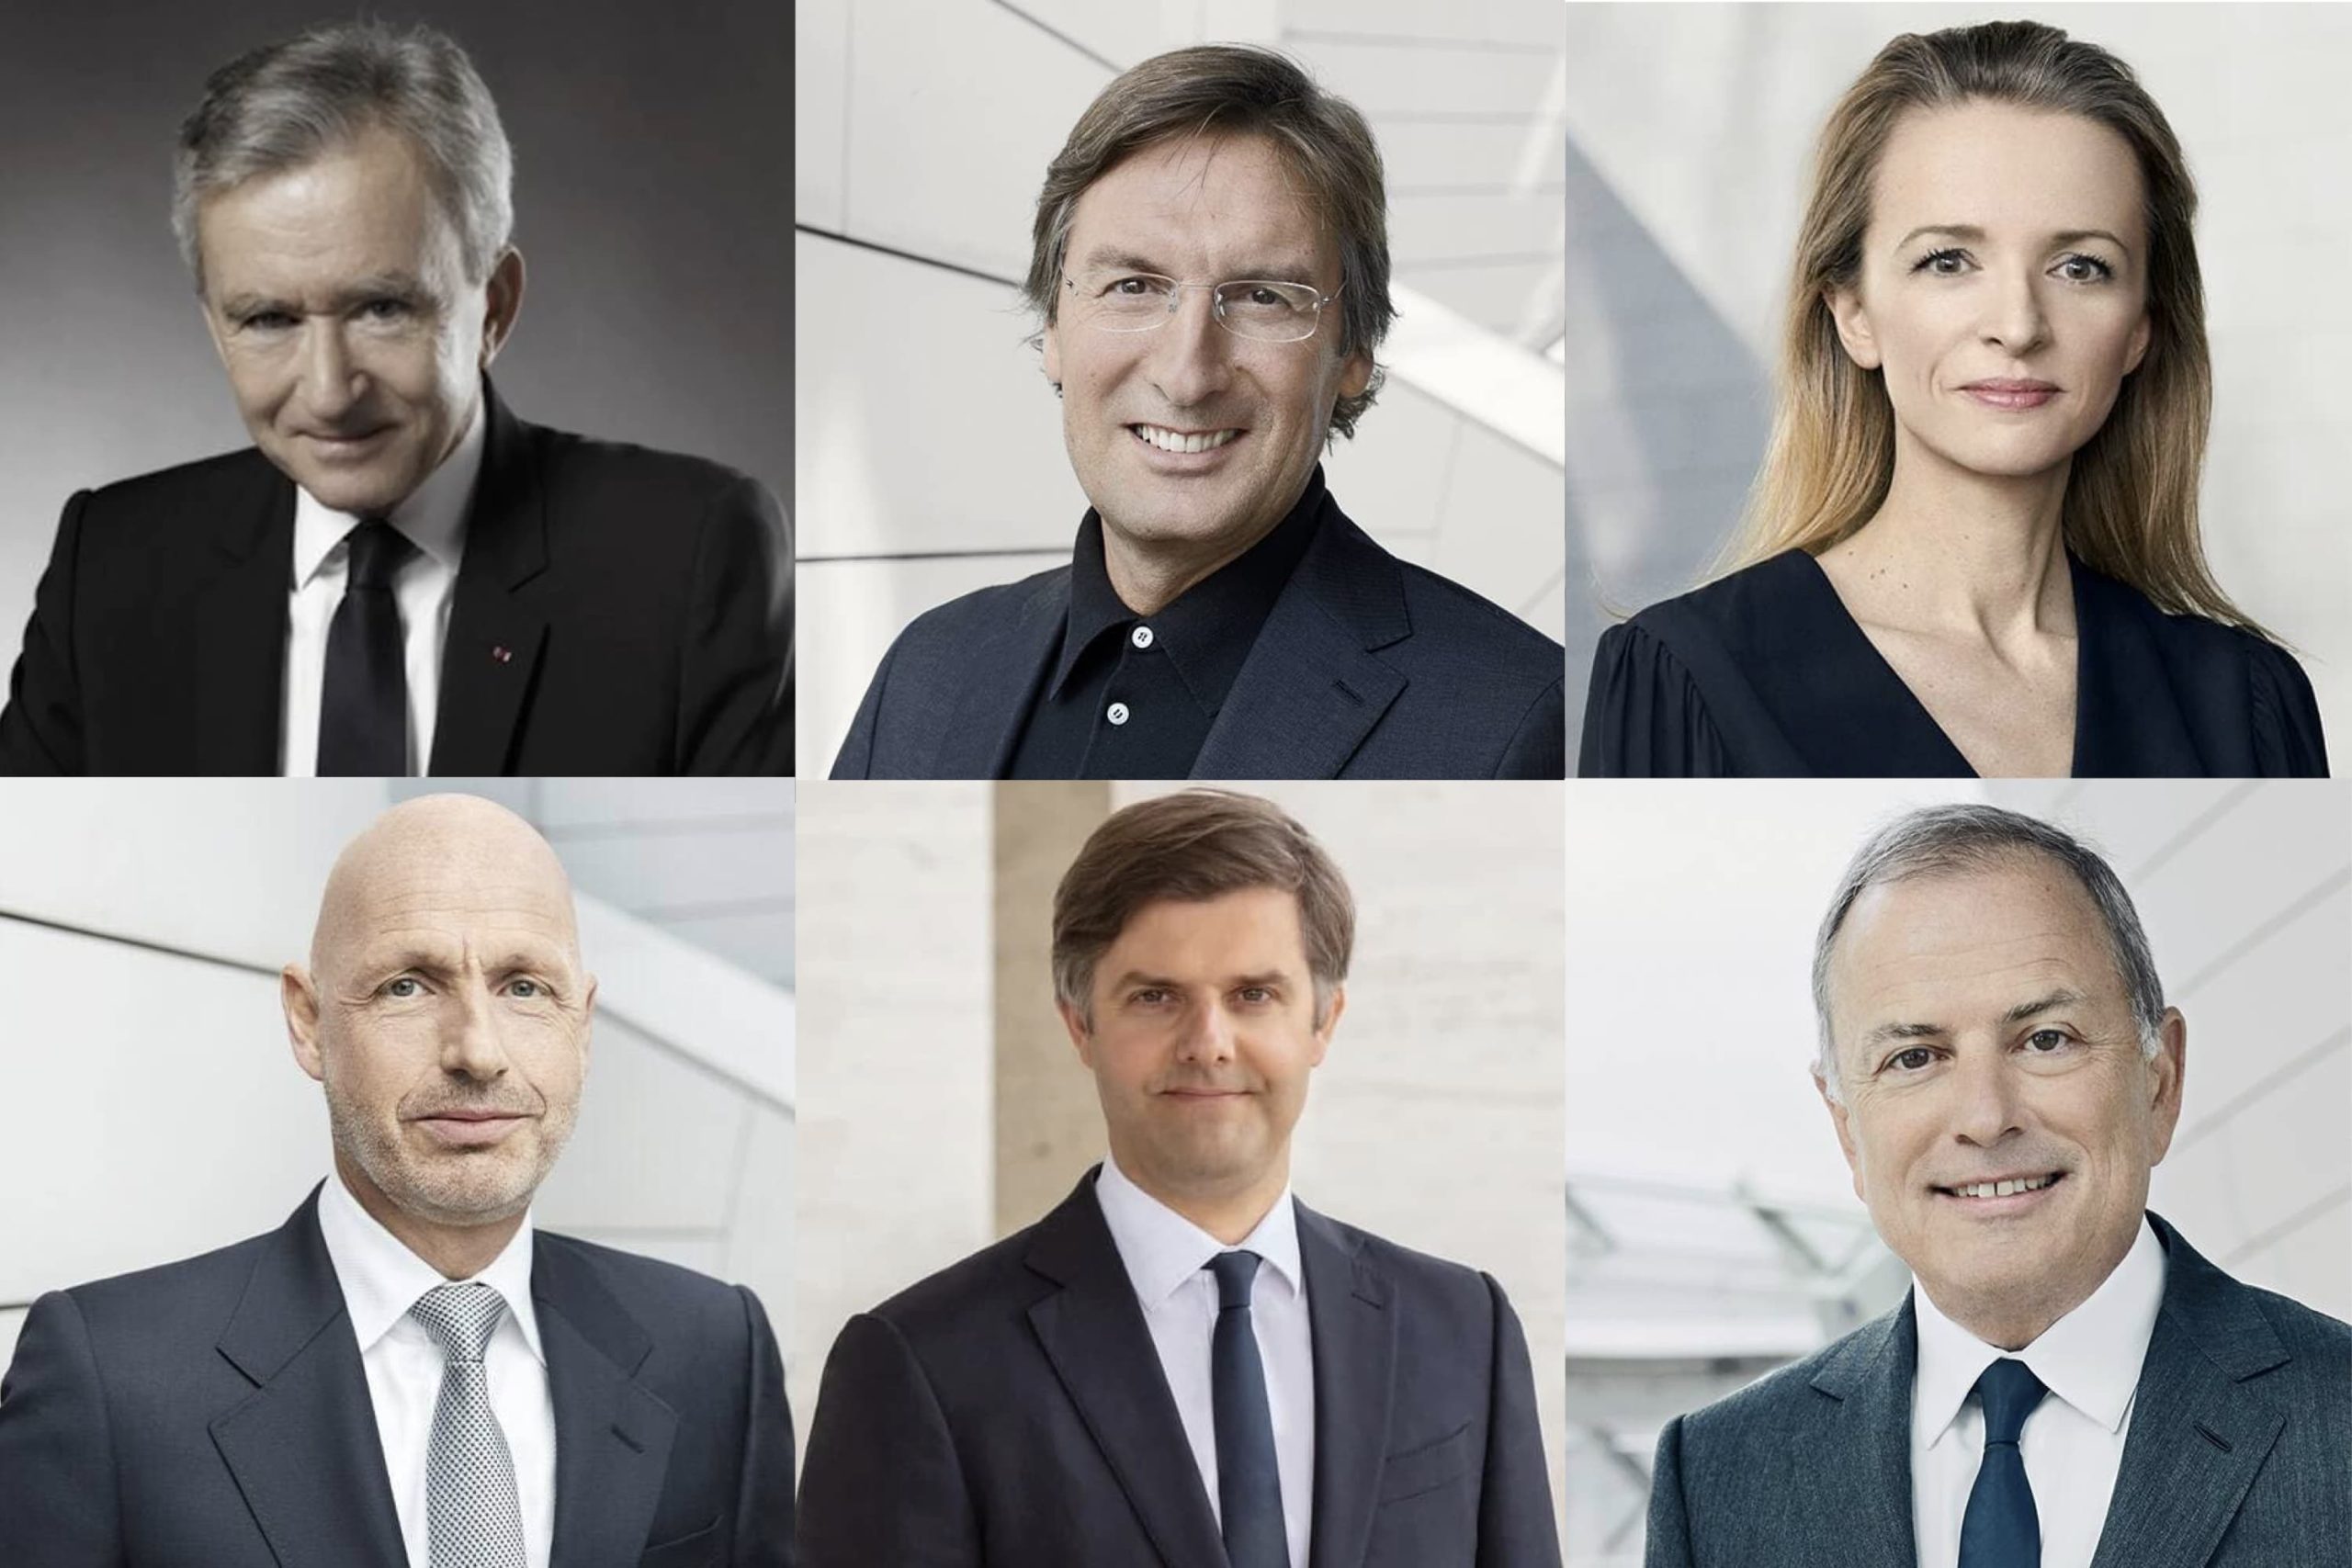 Pietro Beccari Appointed CEO at Louis Vuitton and Delphine Arnault